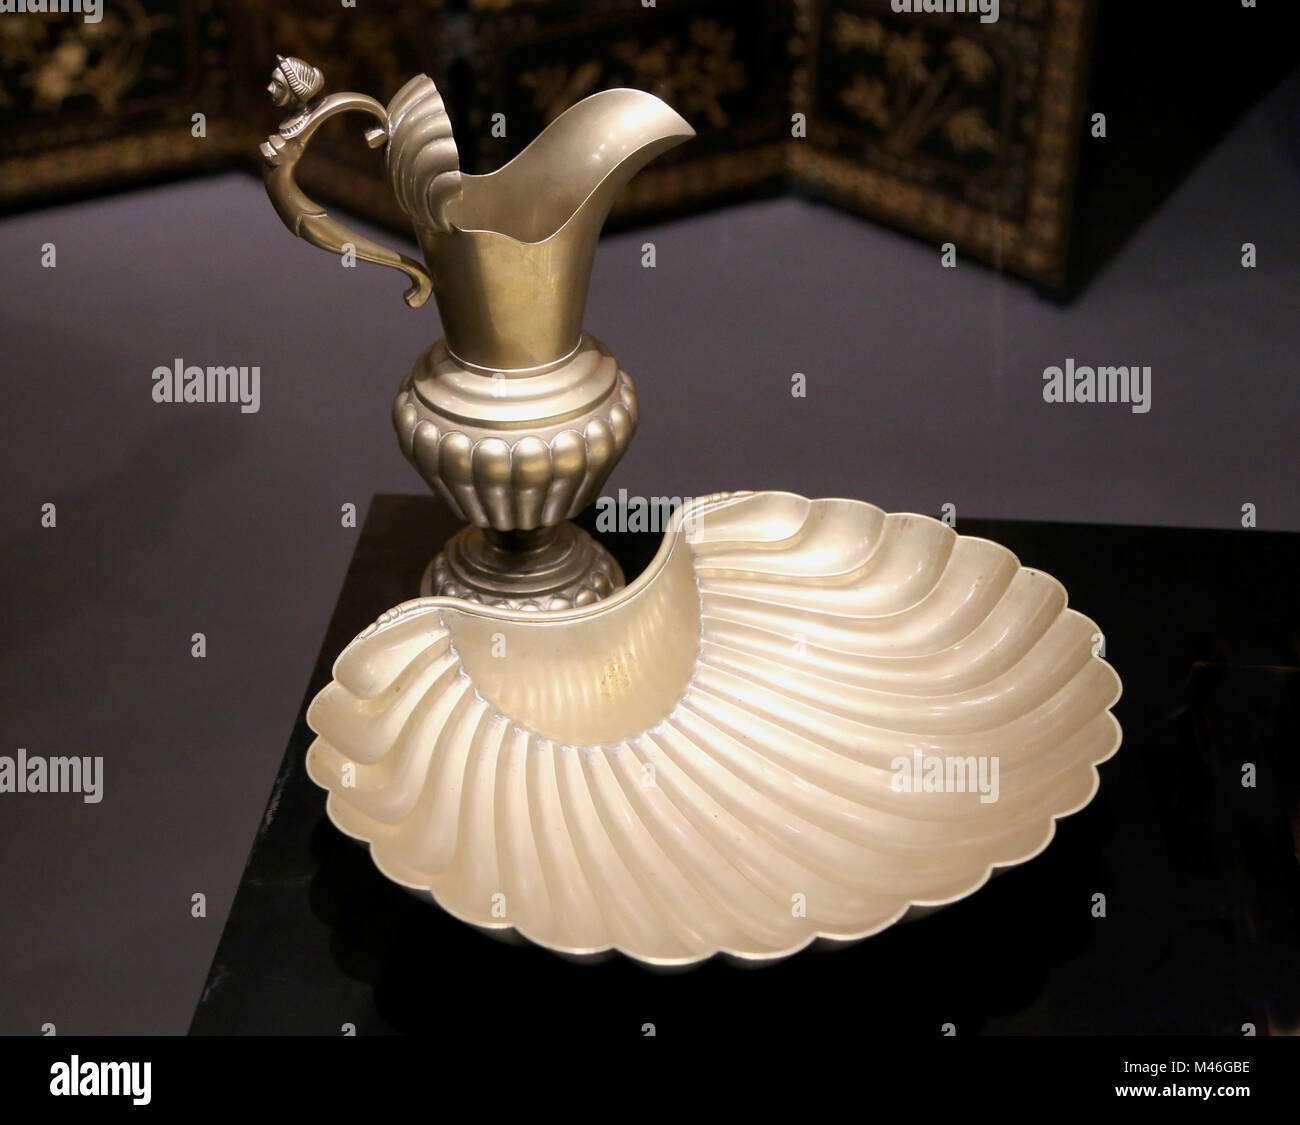 Pitcher and shaving basin (Bacia). Chiselled white metal alloy from China (paktong), 18th-19th century. Stock Photo